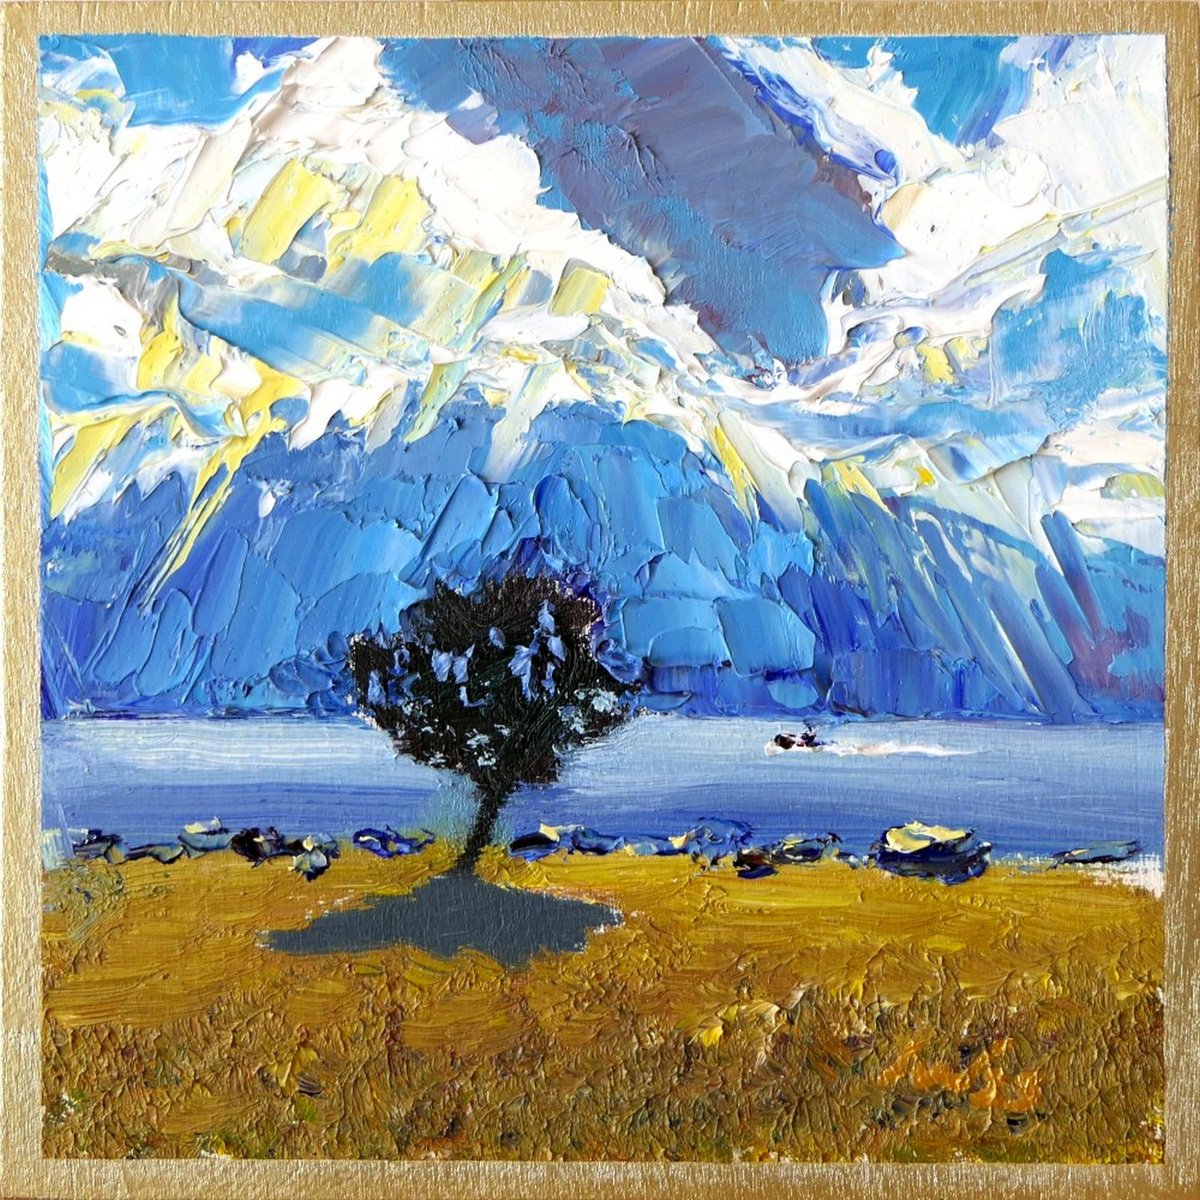 Sun Rays over Garda Lake, Italy Landscape, Small Oil Painting by Ion Sheremet